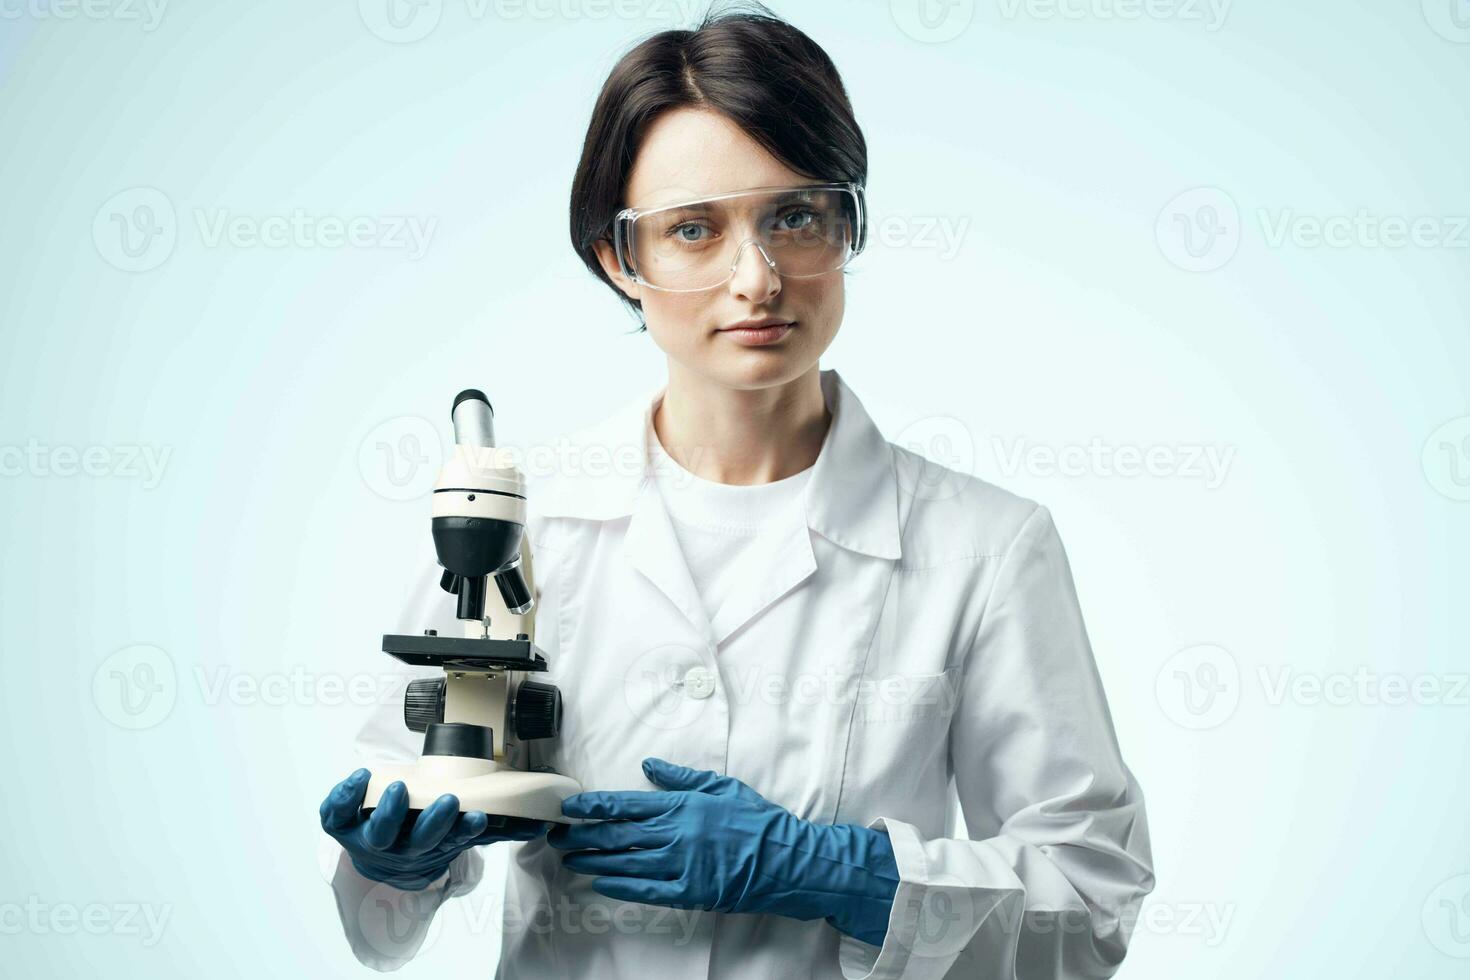 female doctor with microscope in hands technology research science photo